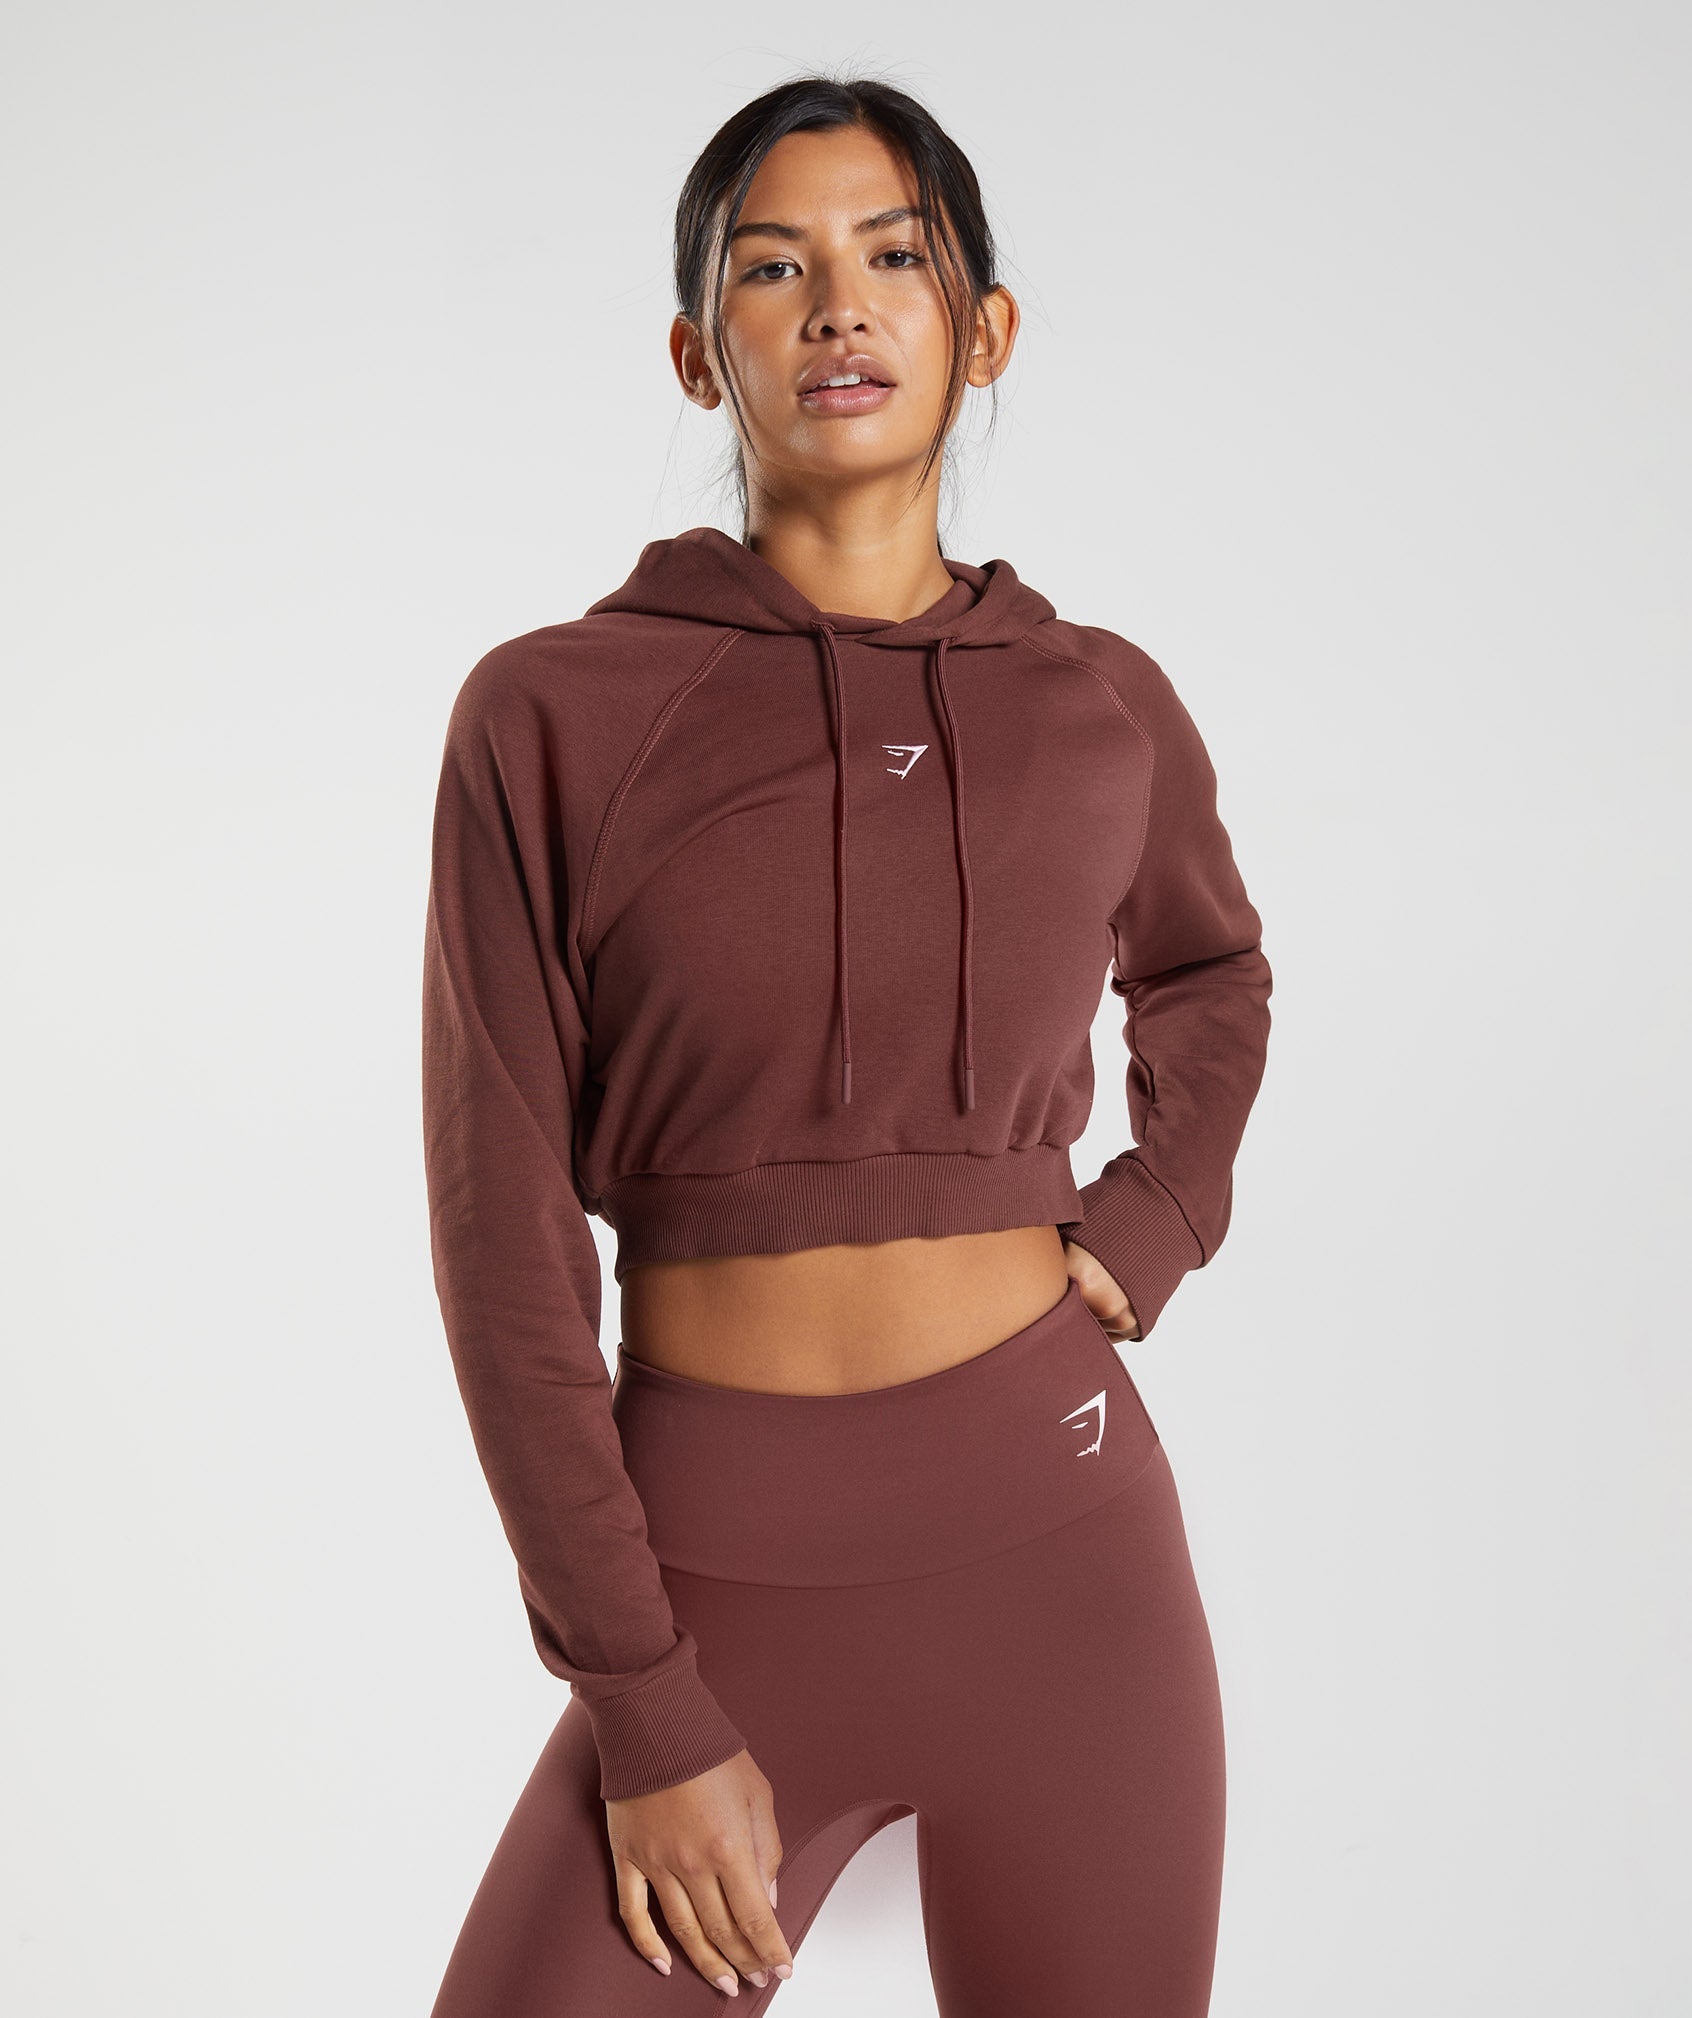 Training Cropped Hoodie in Cherry Brown